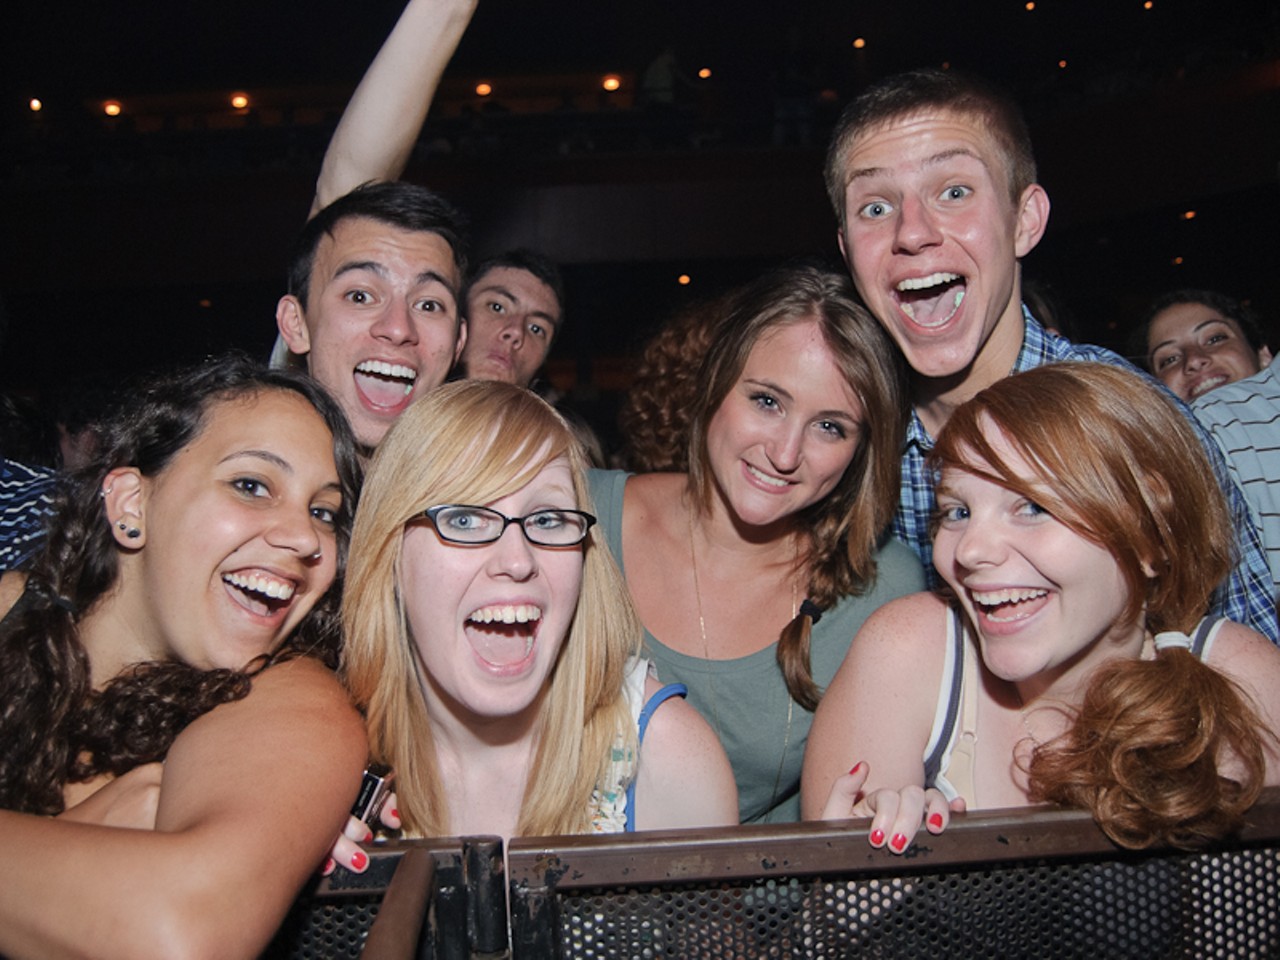 Giddy fans primed for the Passion Pit set last night at the Pageant.